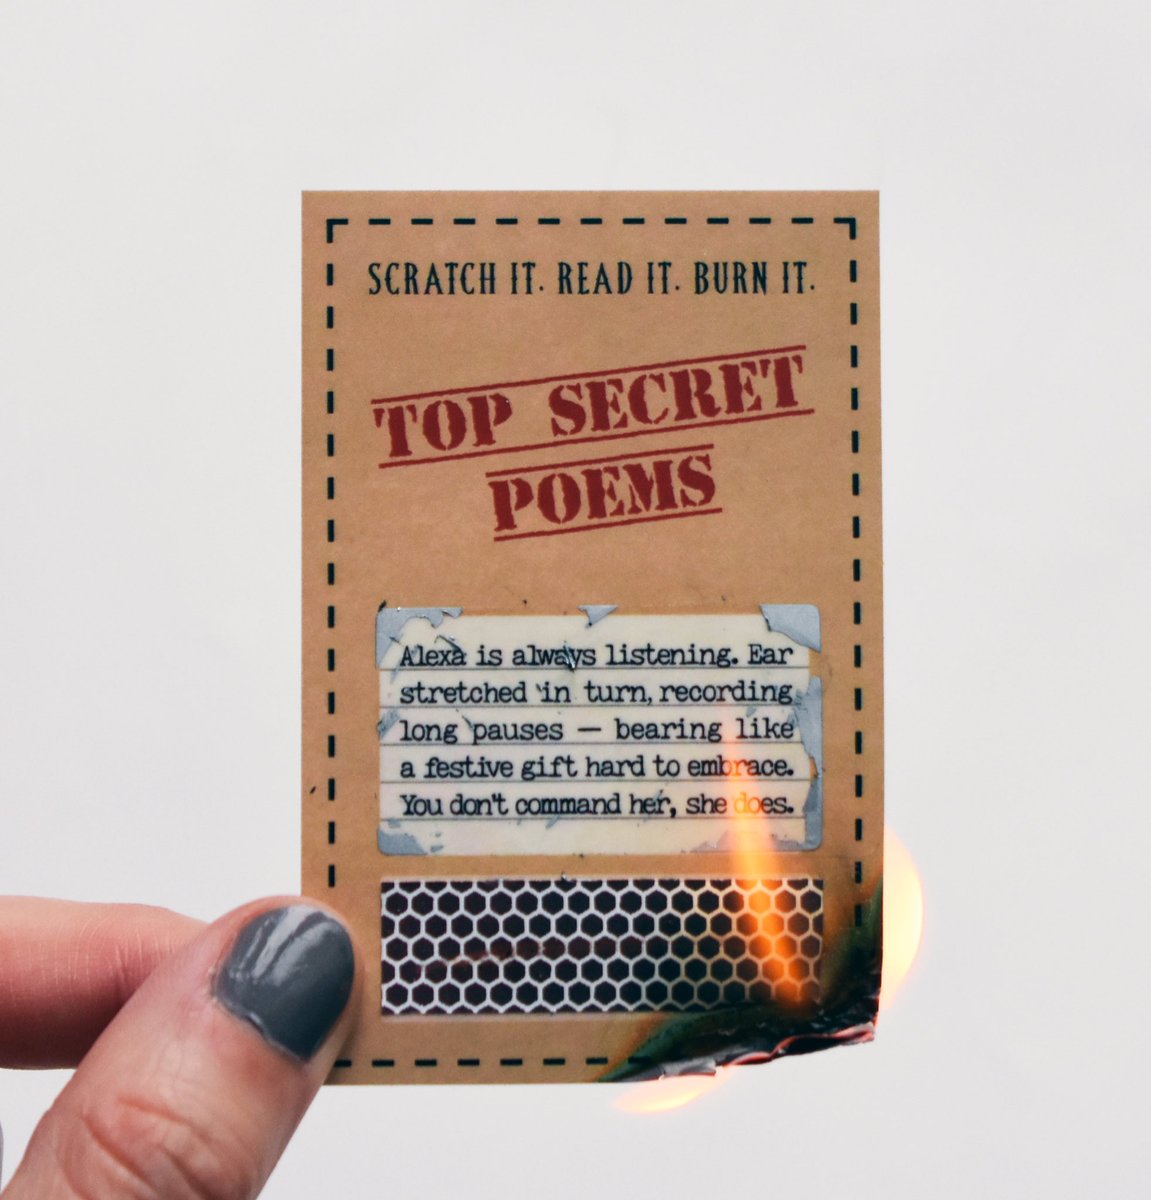 Top Secret Poems comes with a set of instructions: “Scratch it. Read it. Burn it.” The envelope contains a series of poems based on some of the most popular conspiracy theories.🔥👀 poematlas.com/product-page/t…